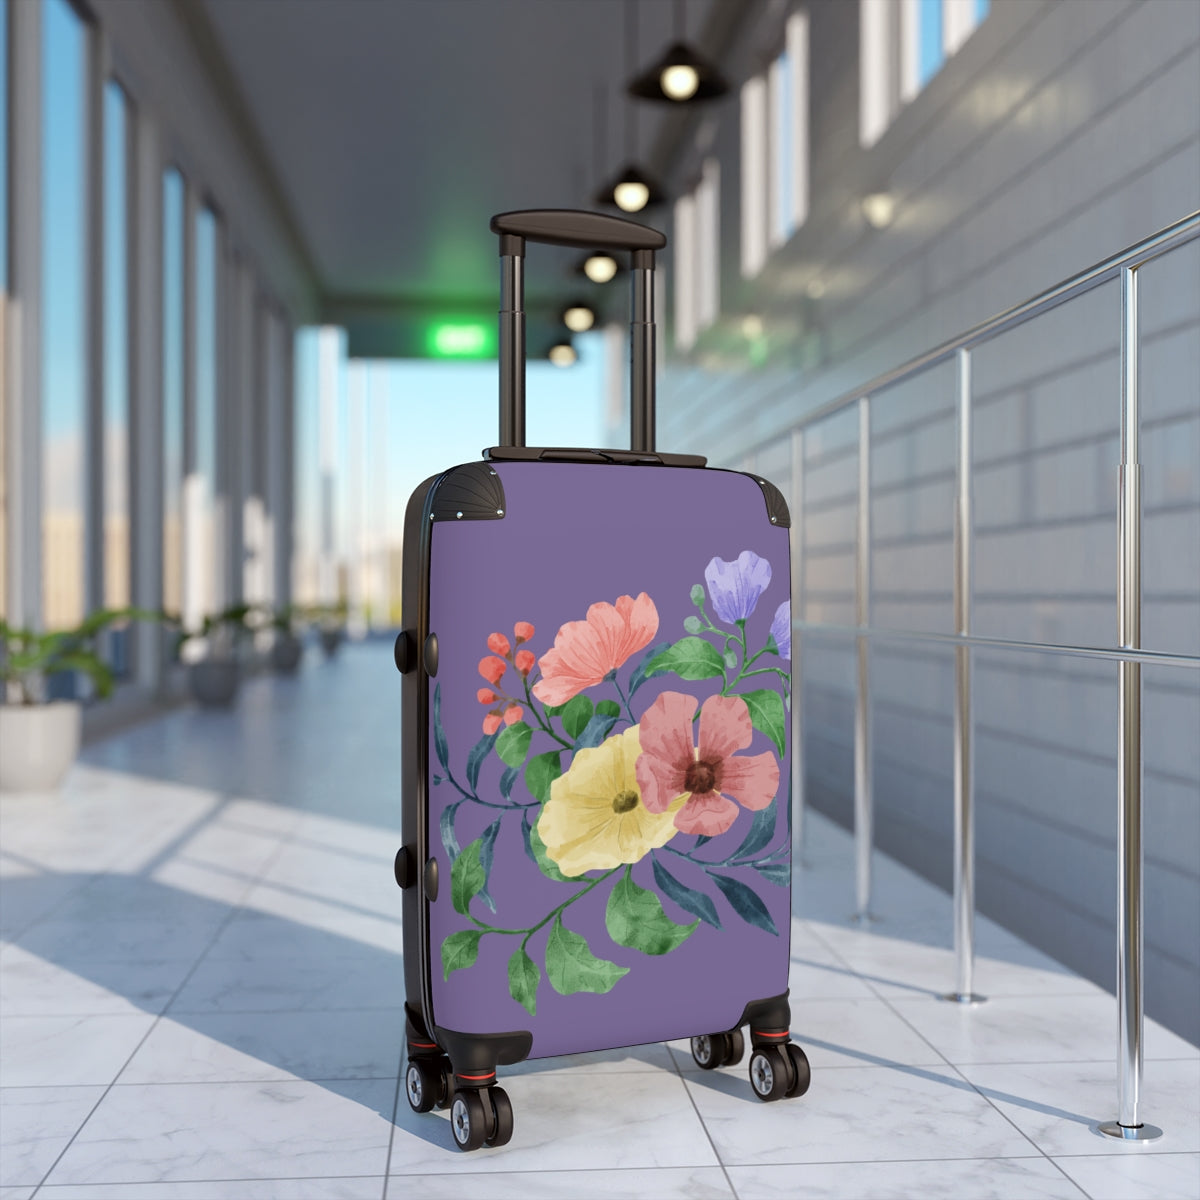 PURPLE FLORAL SUITCASE SET Artzira, Cabin Suitcase Carry-On Luggage, Trolly Travel Bags Double Wheeled Spinners, Women's Choice, Bridal Gift